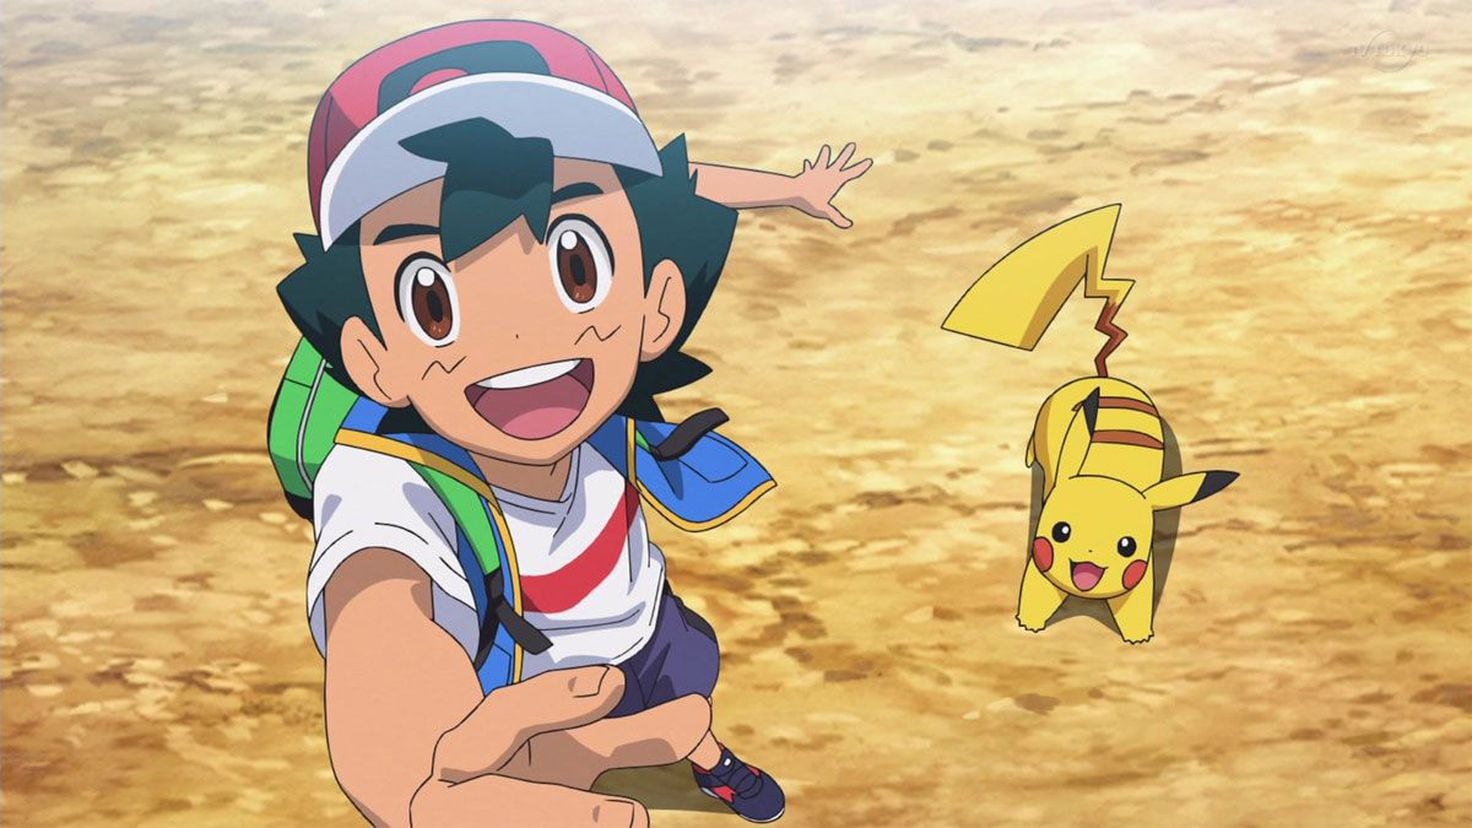 The end of an era: Ash and Pikachu's journey ends after 26 years of  adventure - Meristation